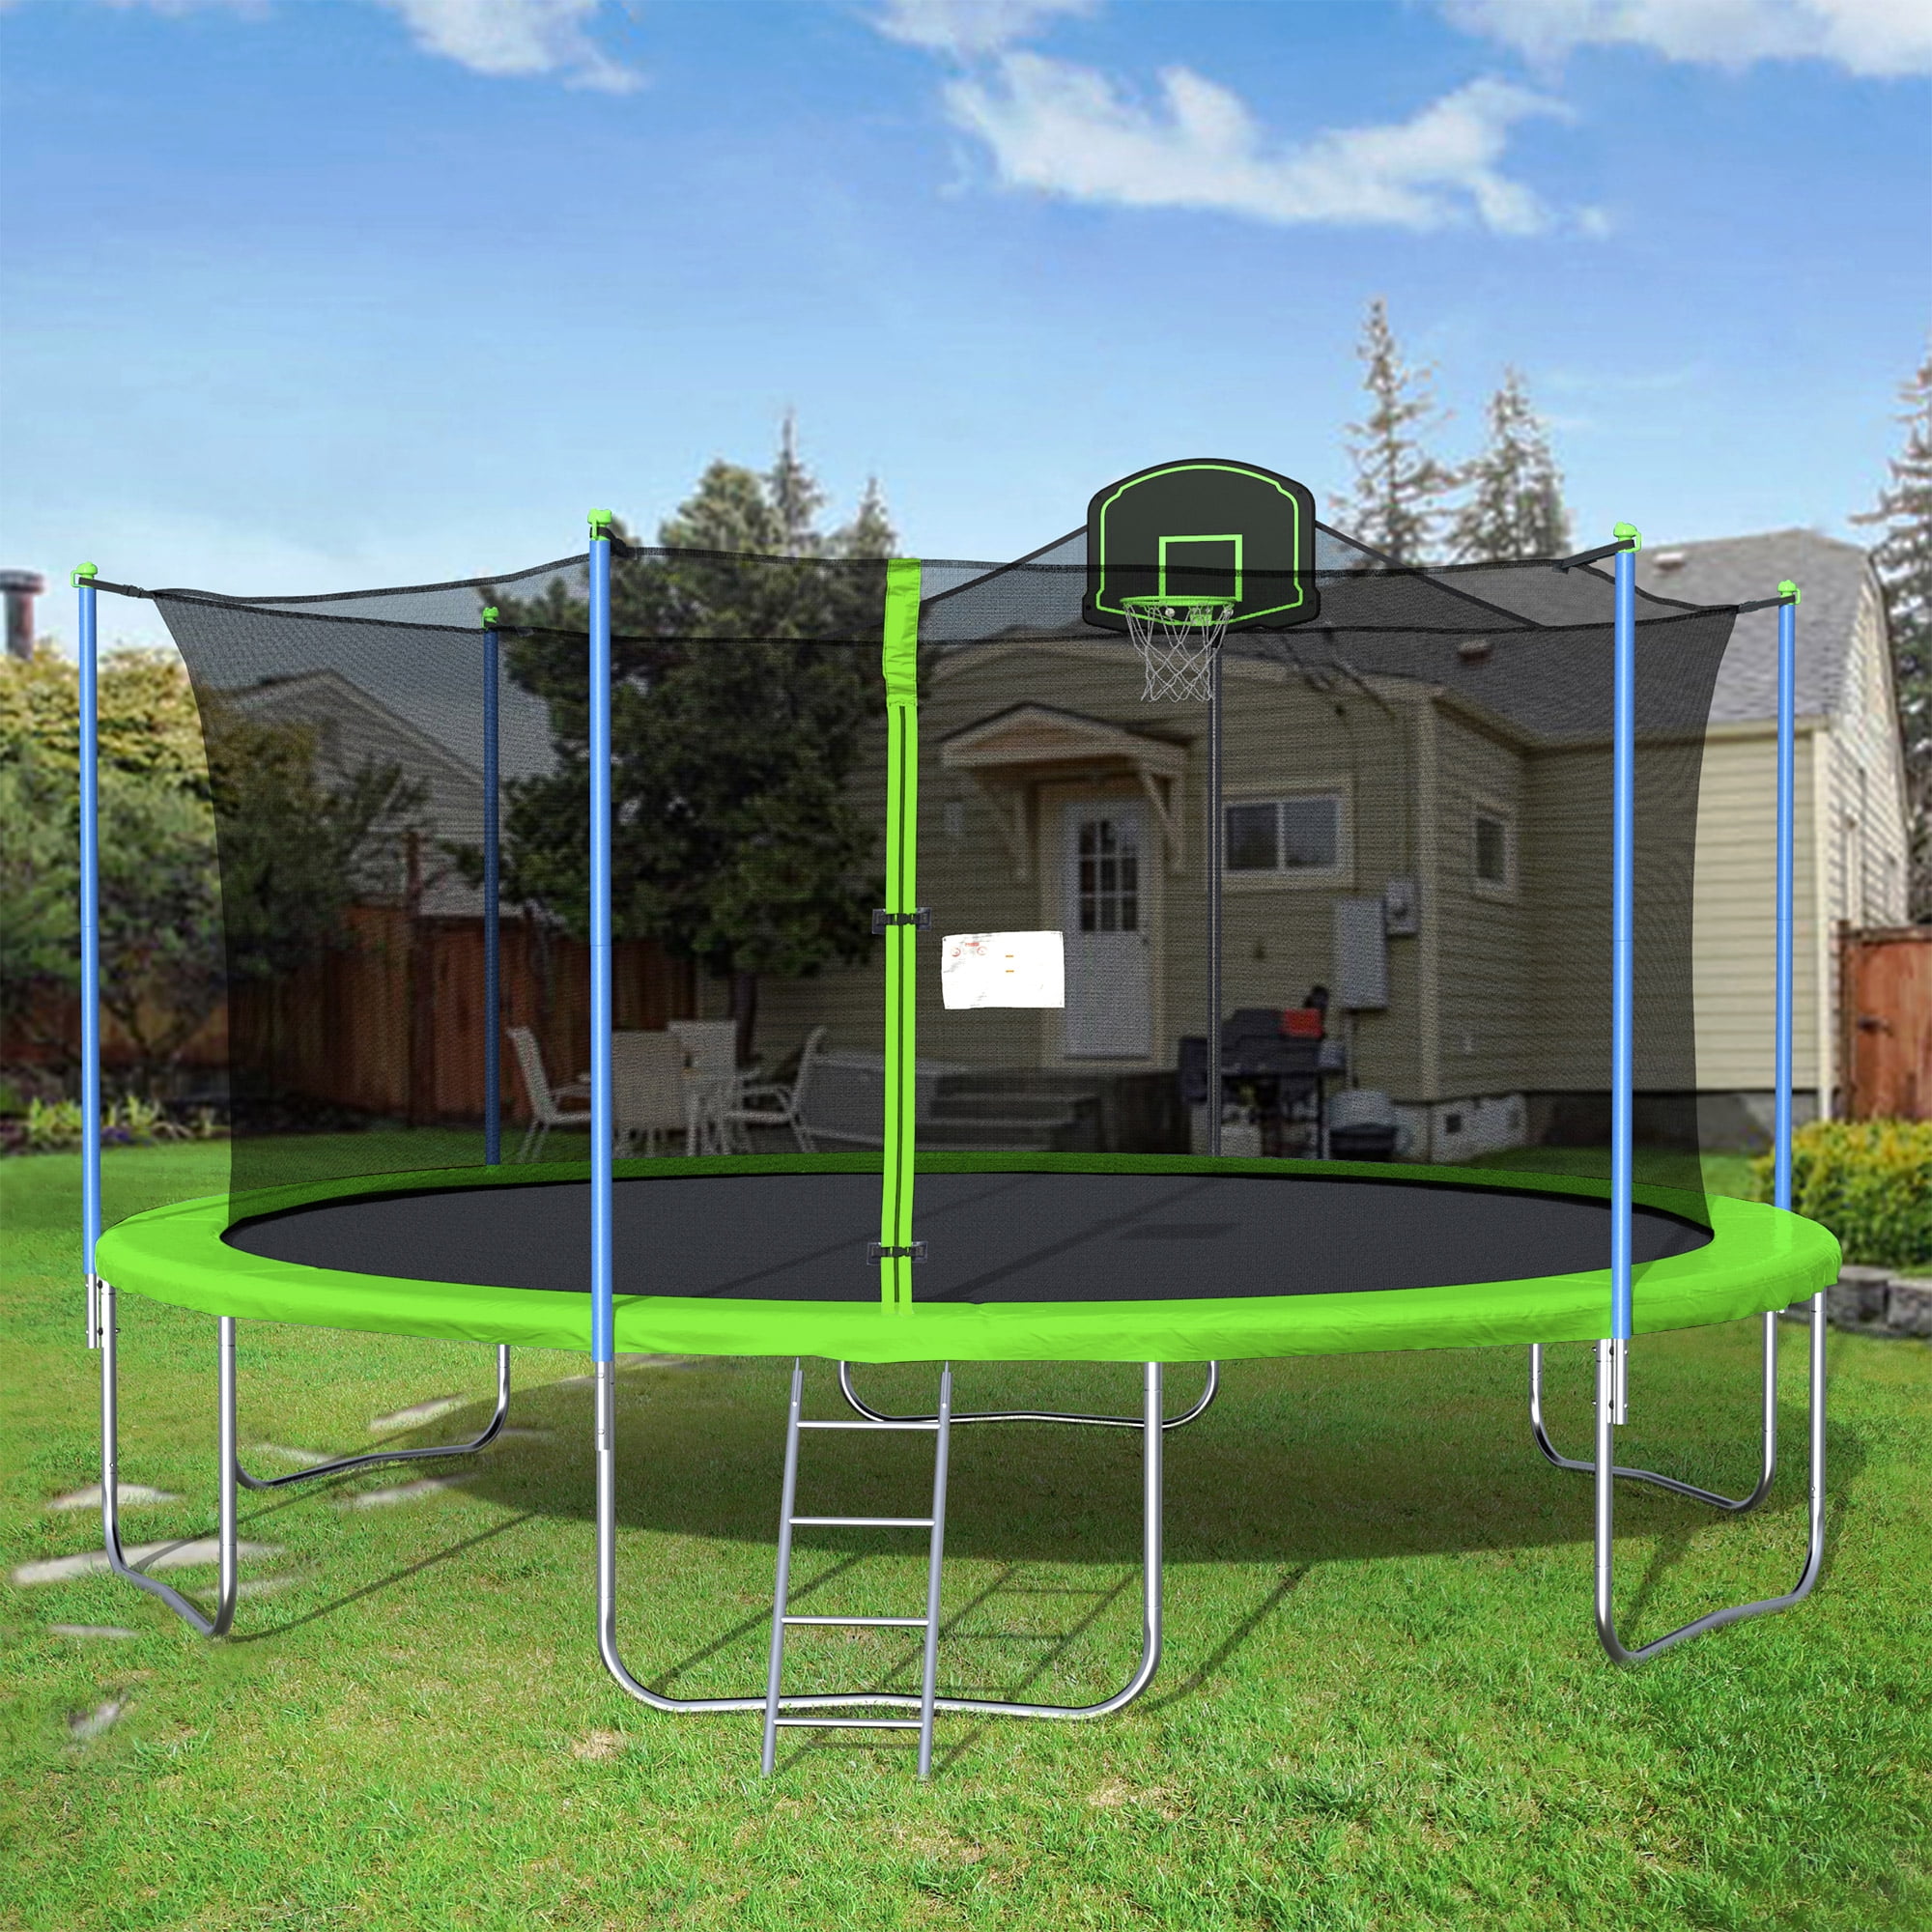 16 FT Trampoline Combo for Kids, Outdoor Trampoline with Basketball Hoop, Trampoline with Enclosure Net and Ladder, Bounce Jumper Trampoline, Indoor Outdoor Play Equipment, Trampoline for Kids, W12971